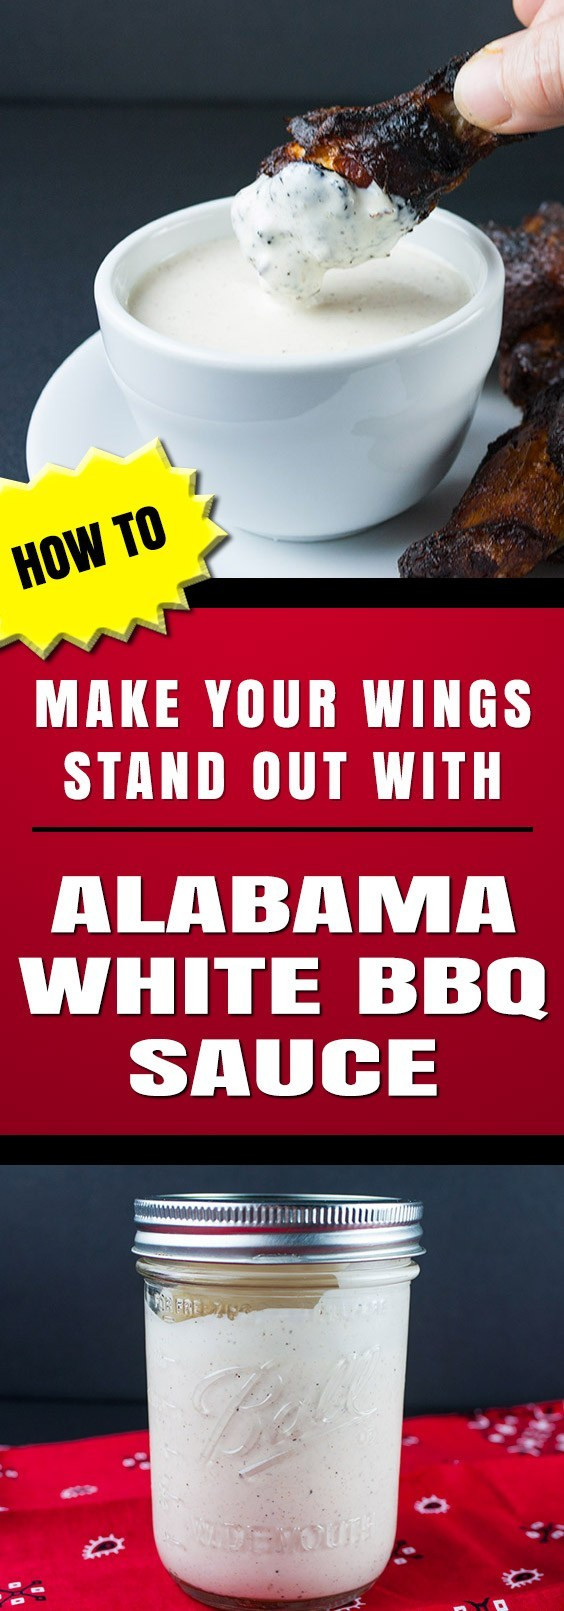 Alabama White Bbq Sauce
 Alabama White BBQ Sauce Elevate Your BBQ To The Next